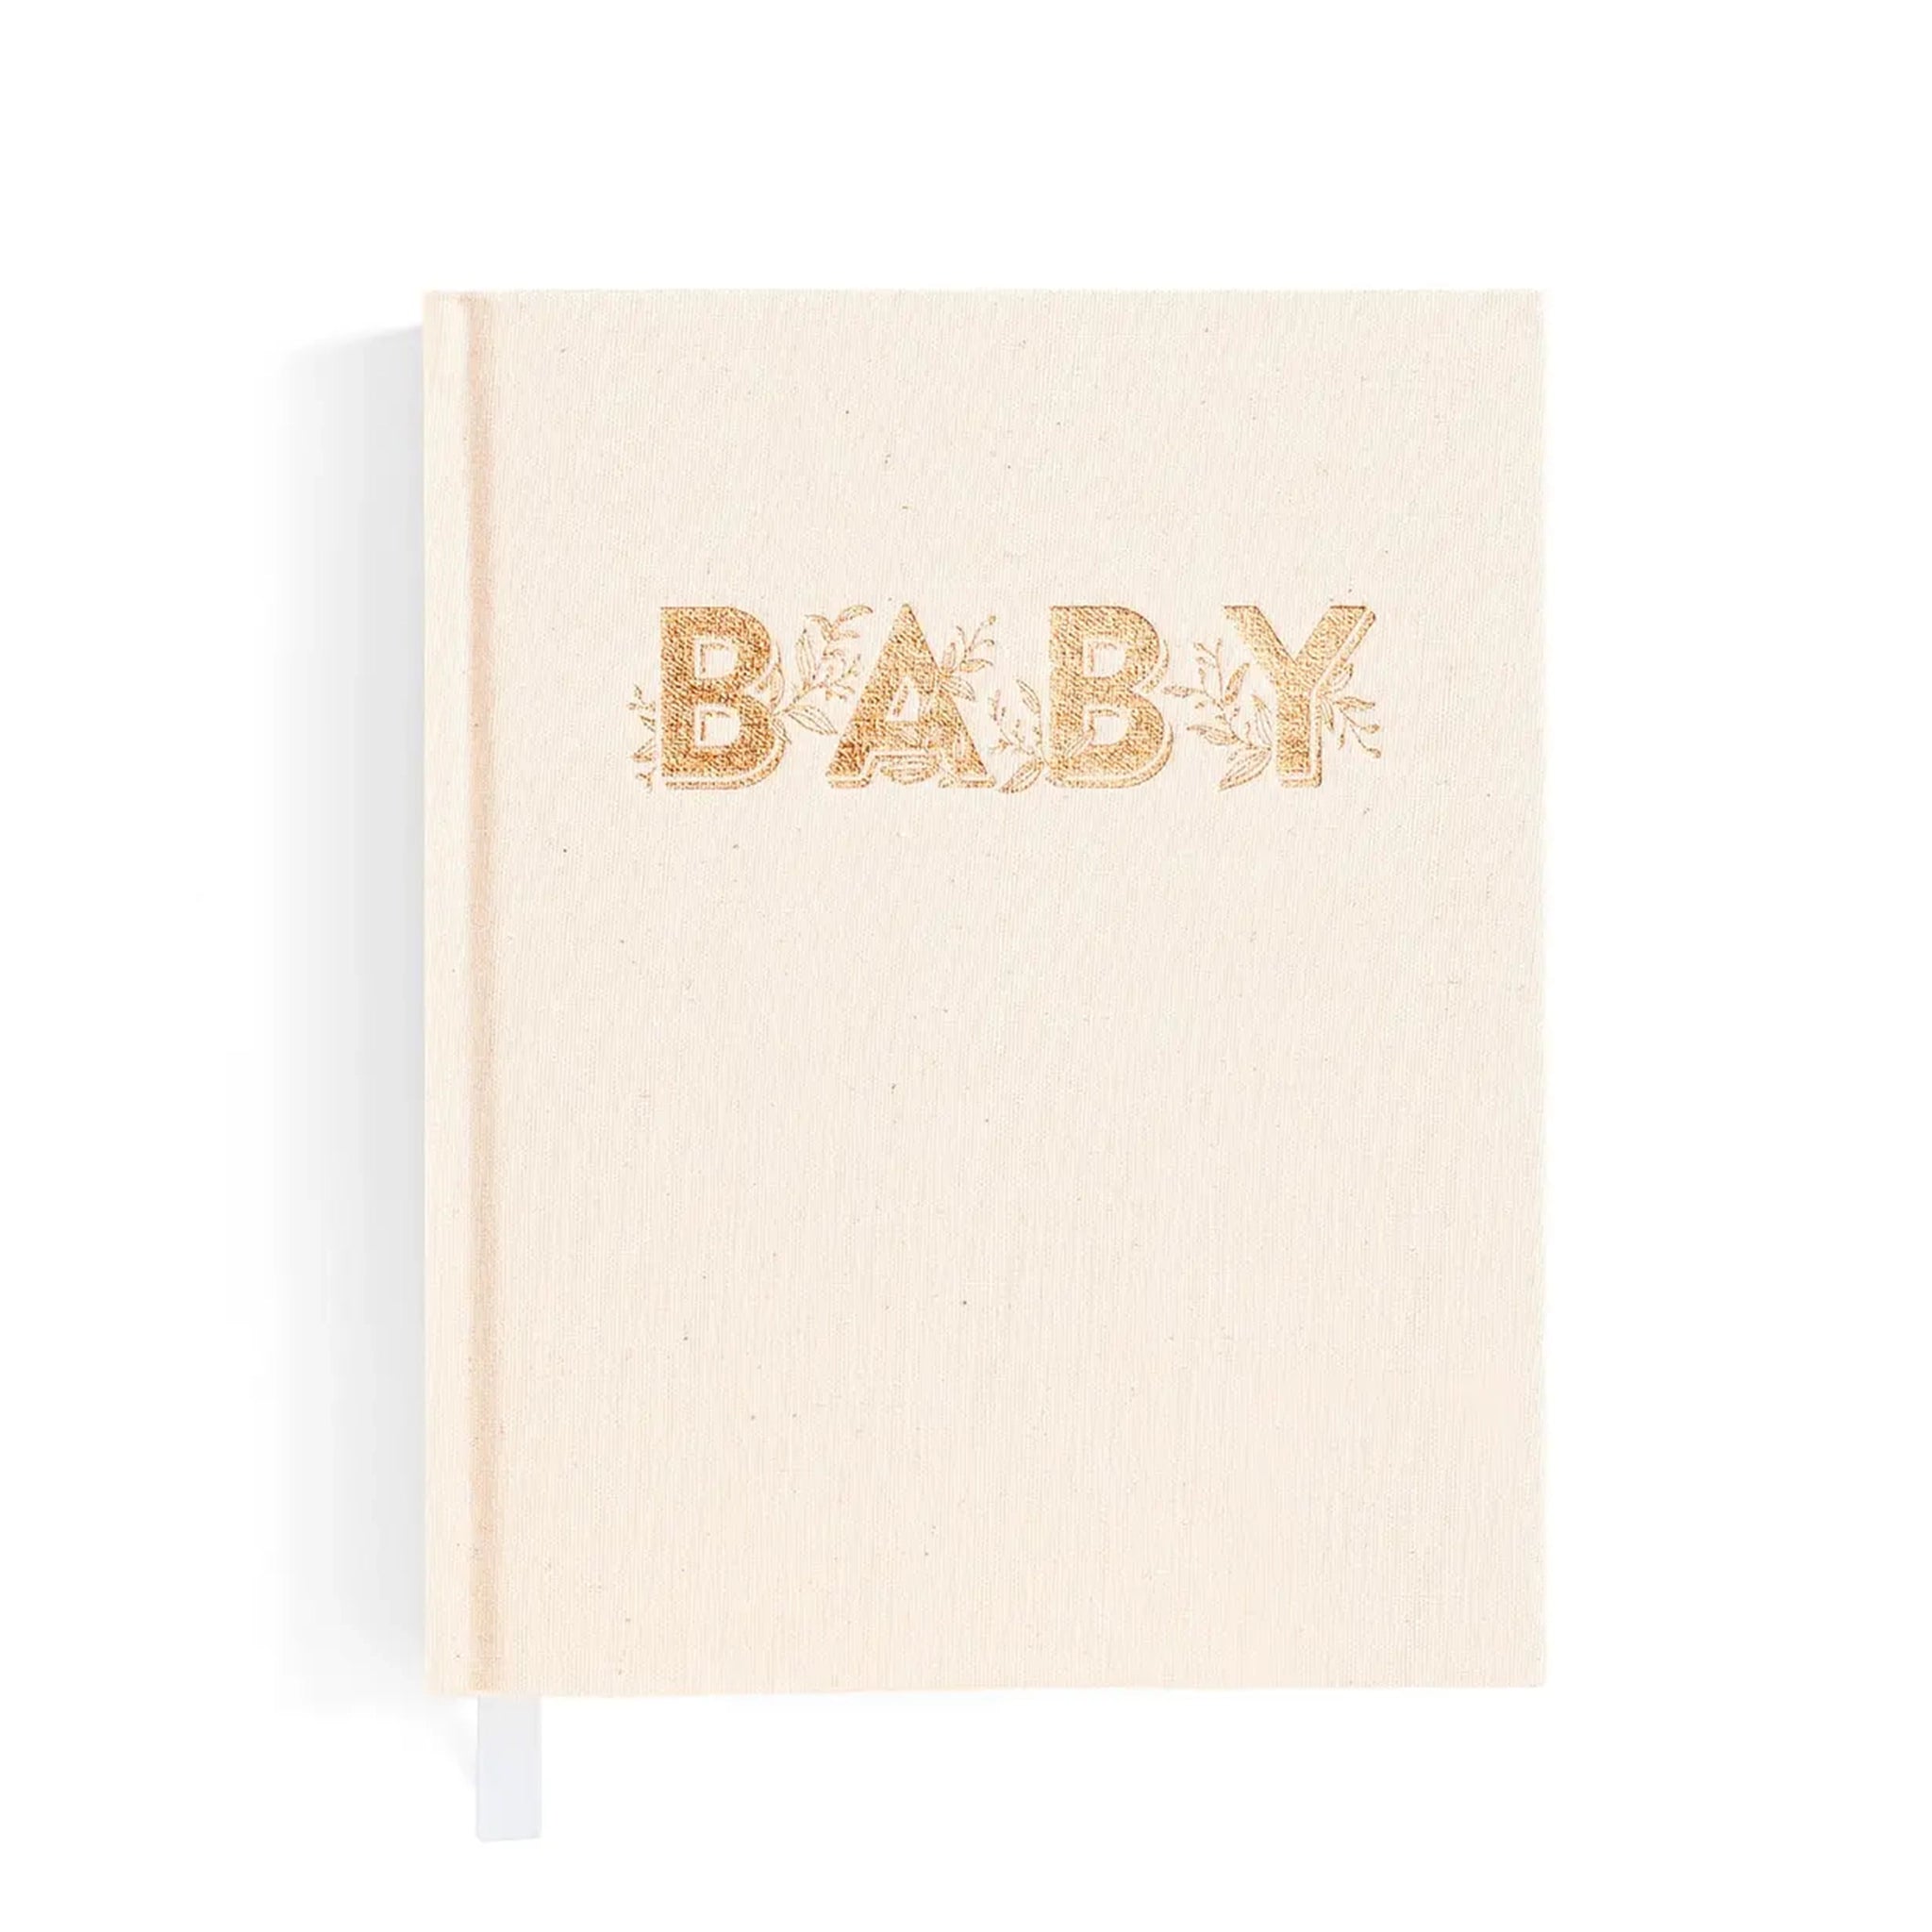 On a white background is an ivory book that read, "BABY" on the front cover in gold letters. 